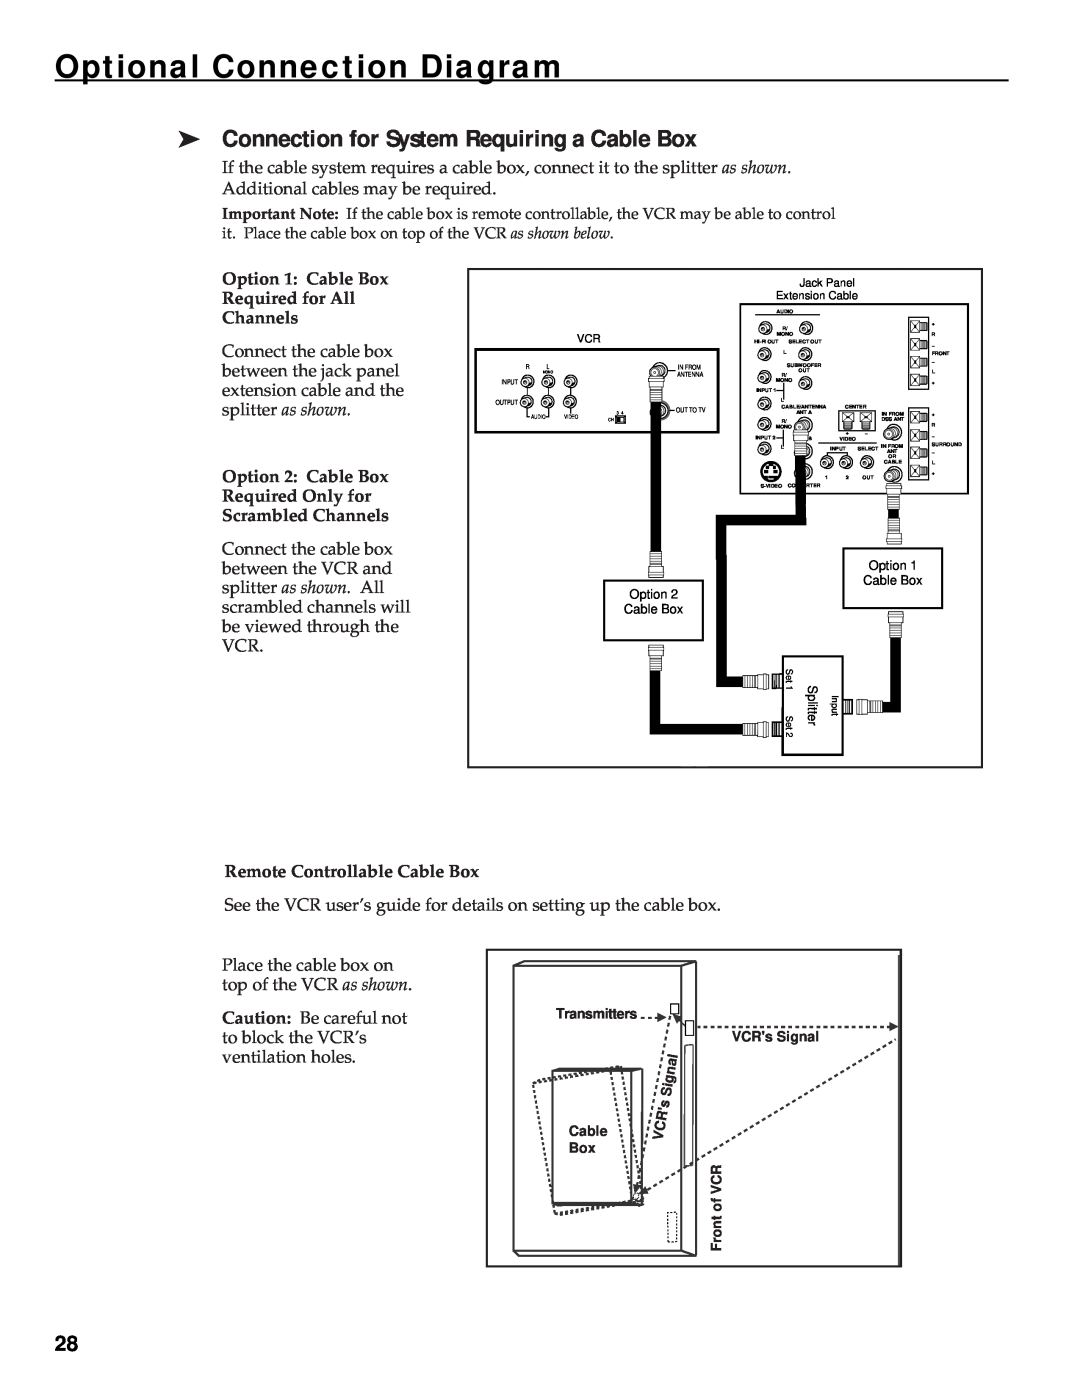 RCA HT35752BD Optional Connection Diagram, Connection for System Requiring a Cable Box, Remote Controllable Cable Box 